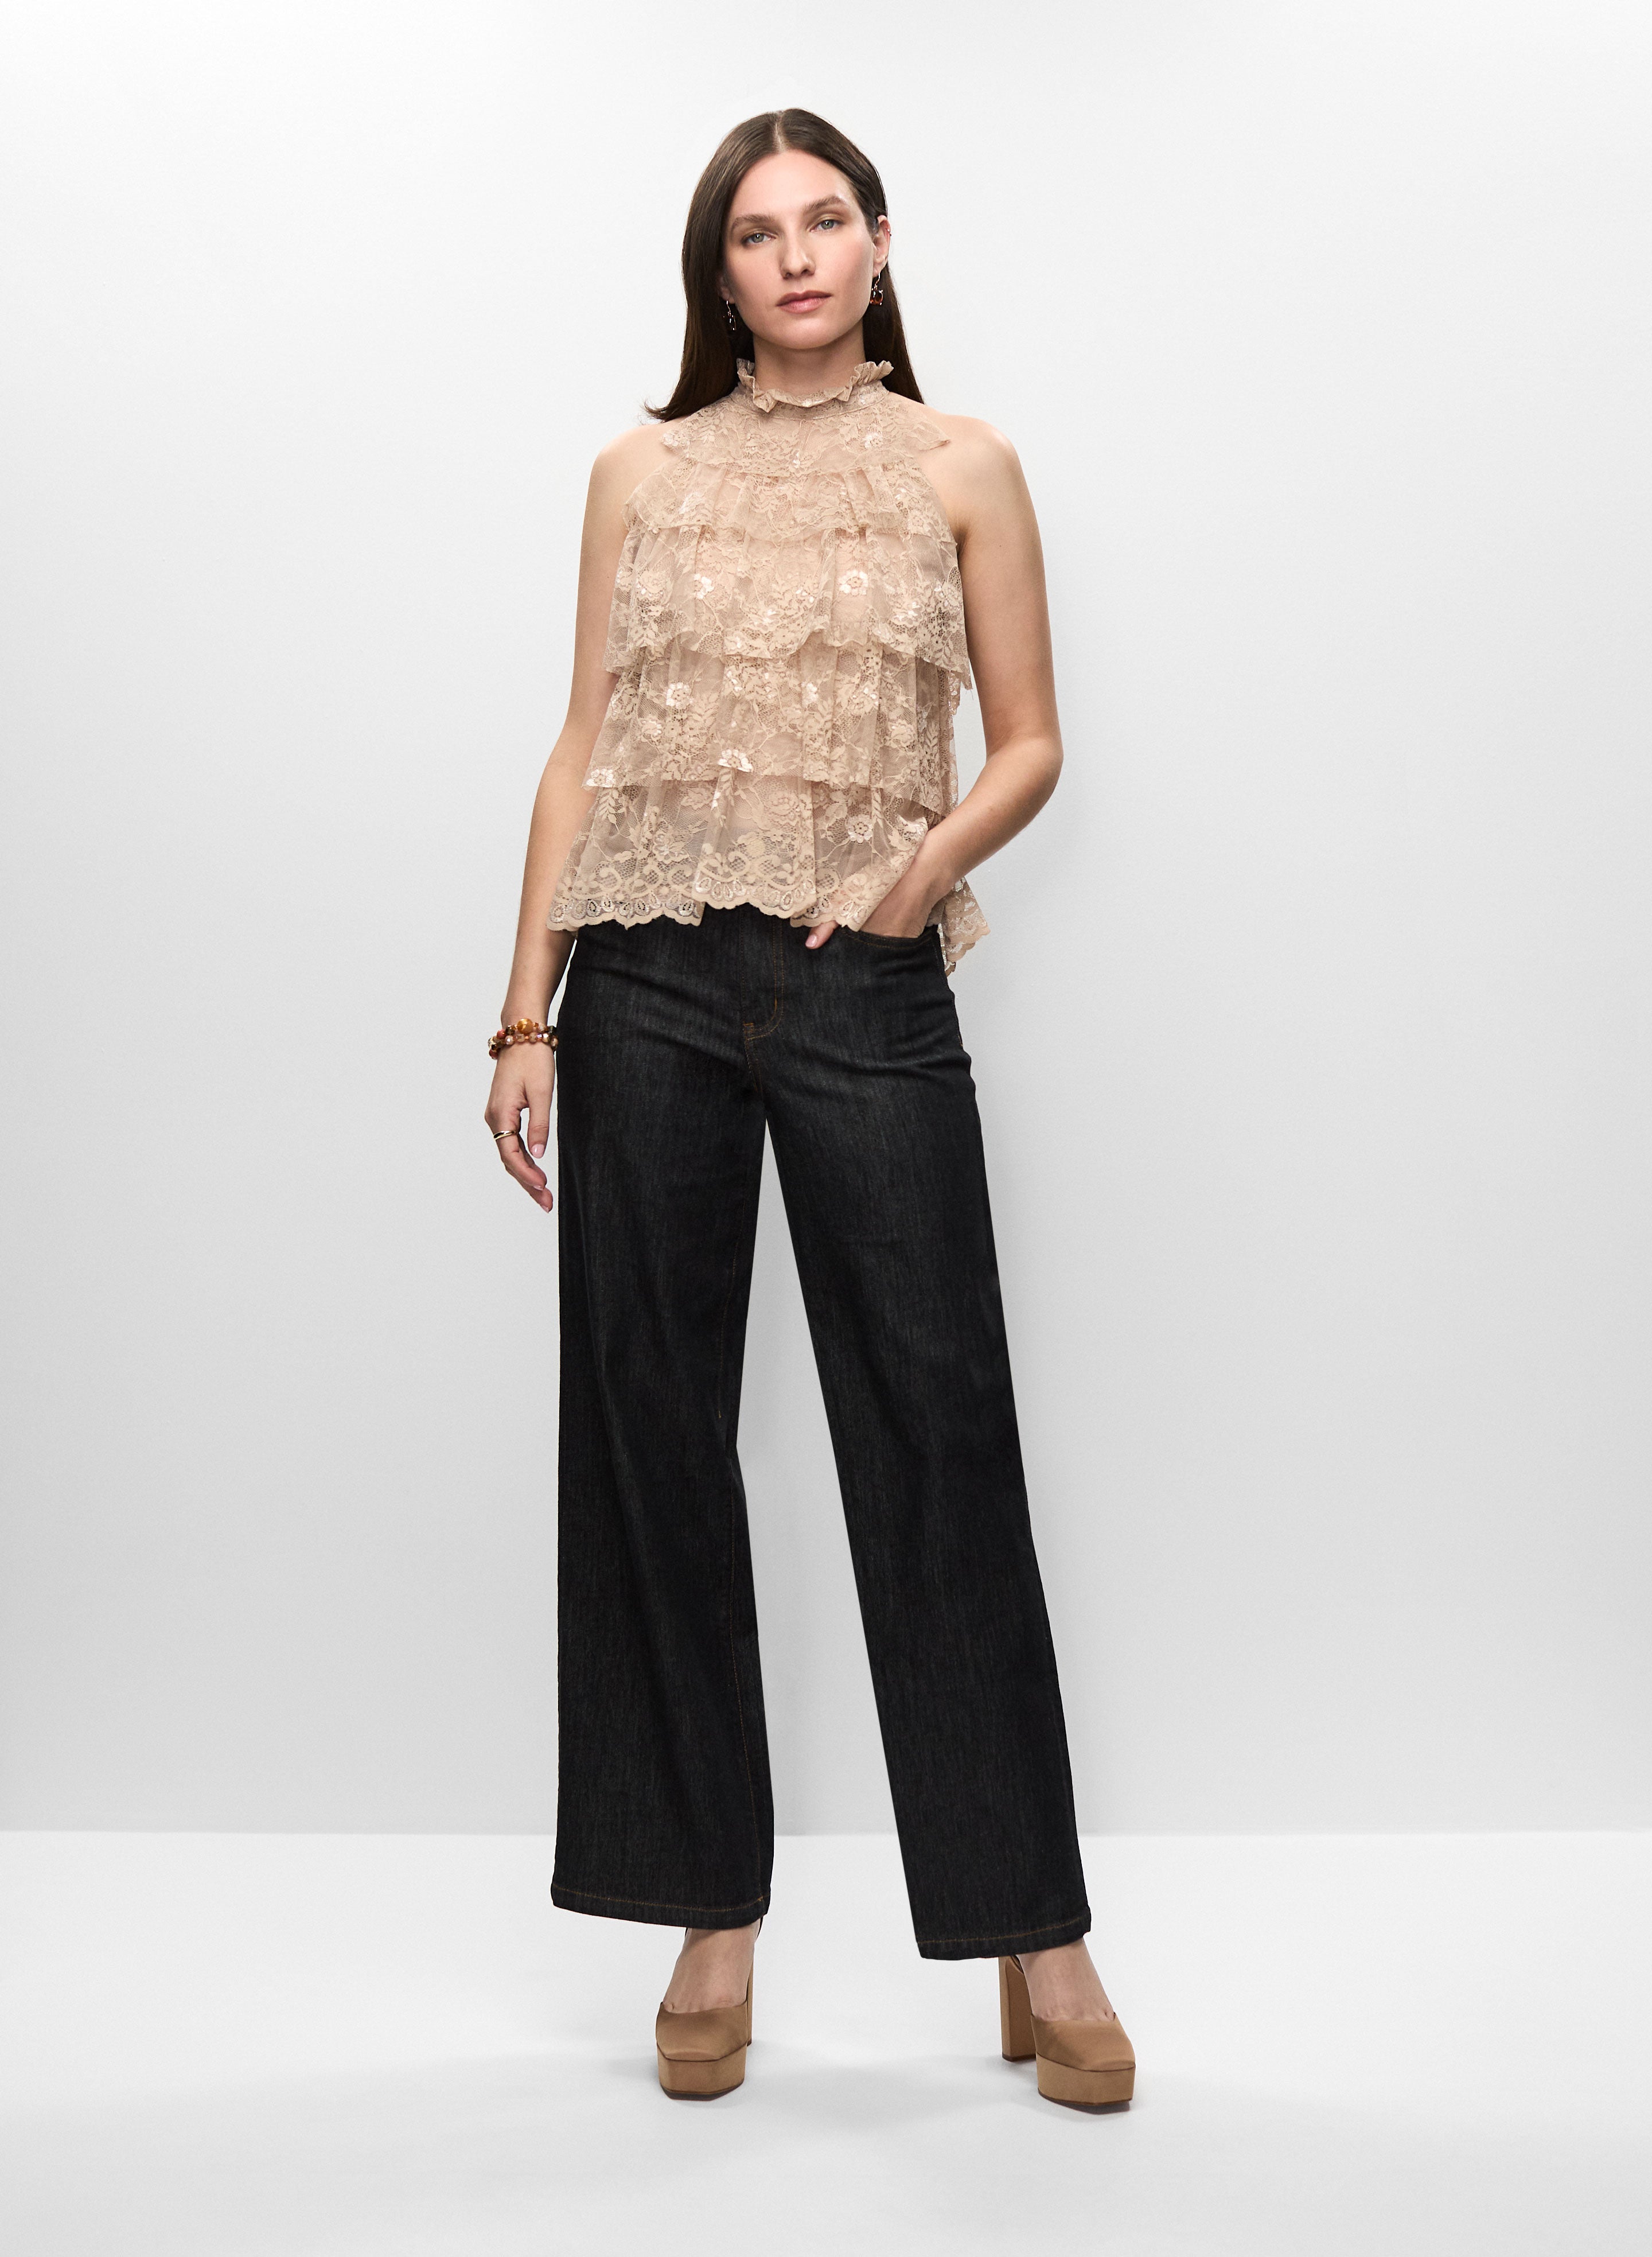 Tiered Lace Sleeveless Top & Wide Leg Jeans